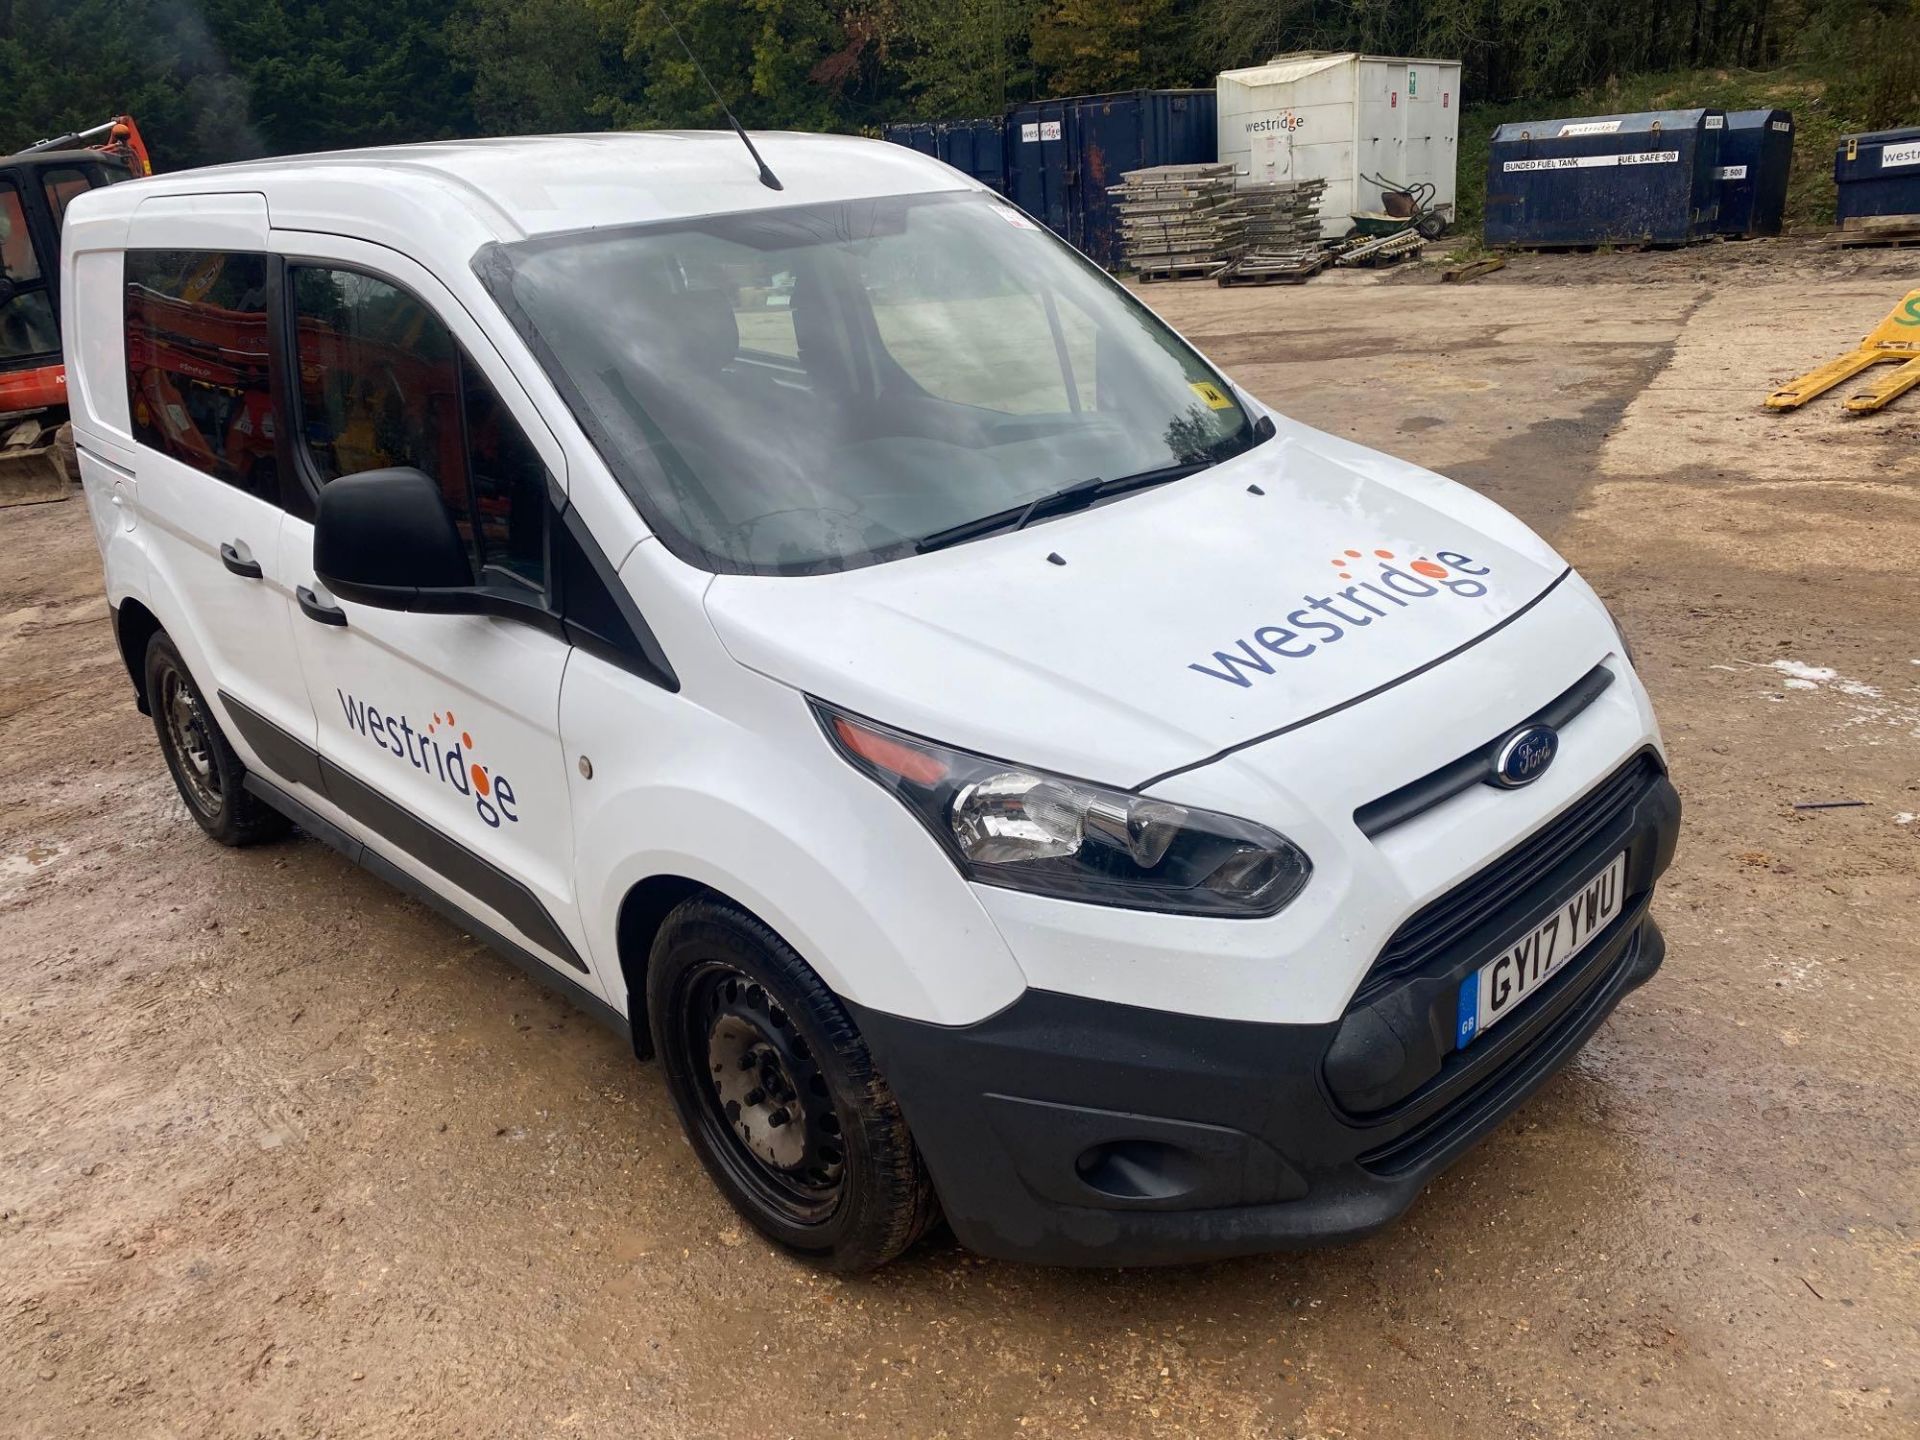 Ford Transit Connect 220 SWB L1 1.5 TDCi diesel 75PS crew cab 5 seater, limited panal van,